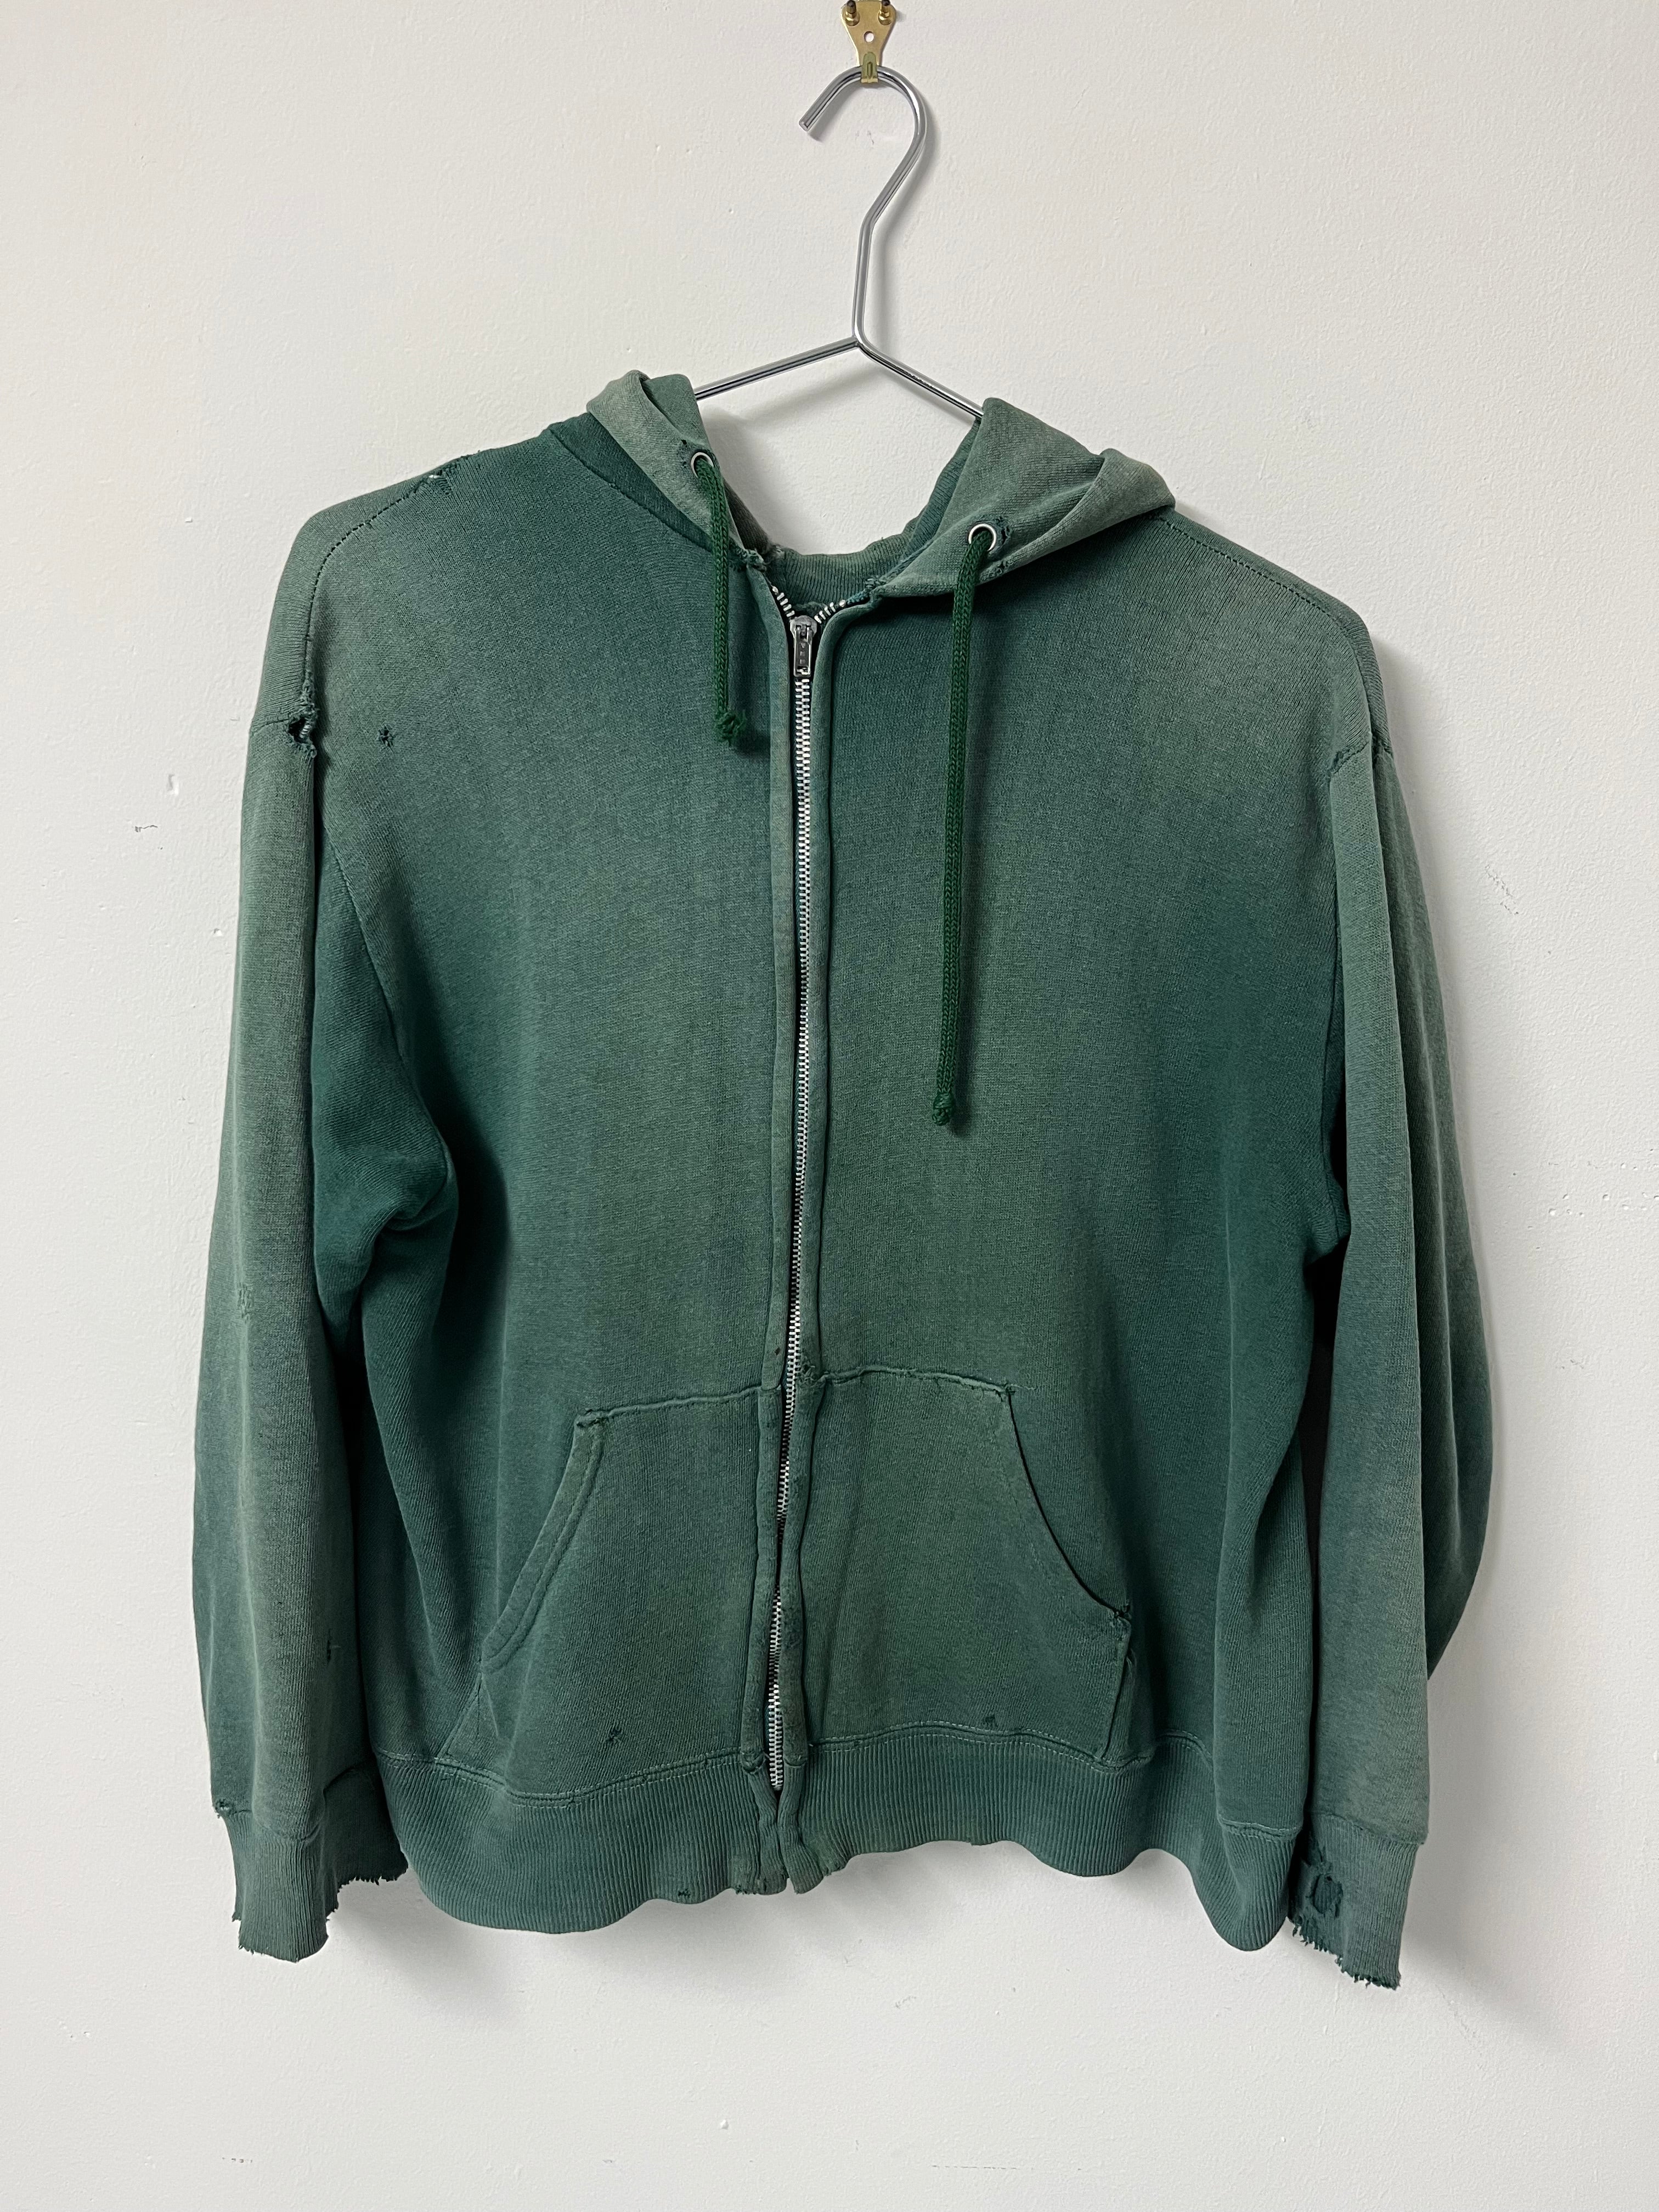 Sun Faded Early ‘70s Zip Hoodie With Repairs - Faded Green - S/M